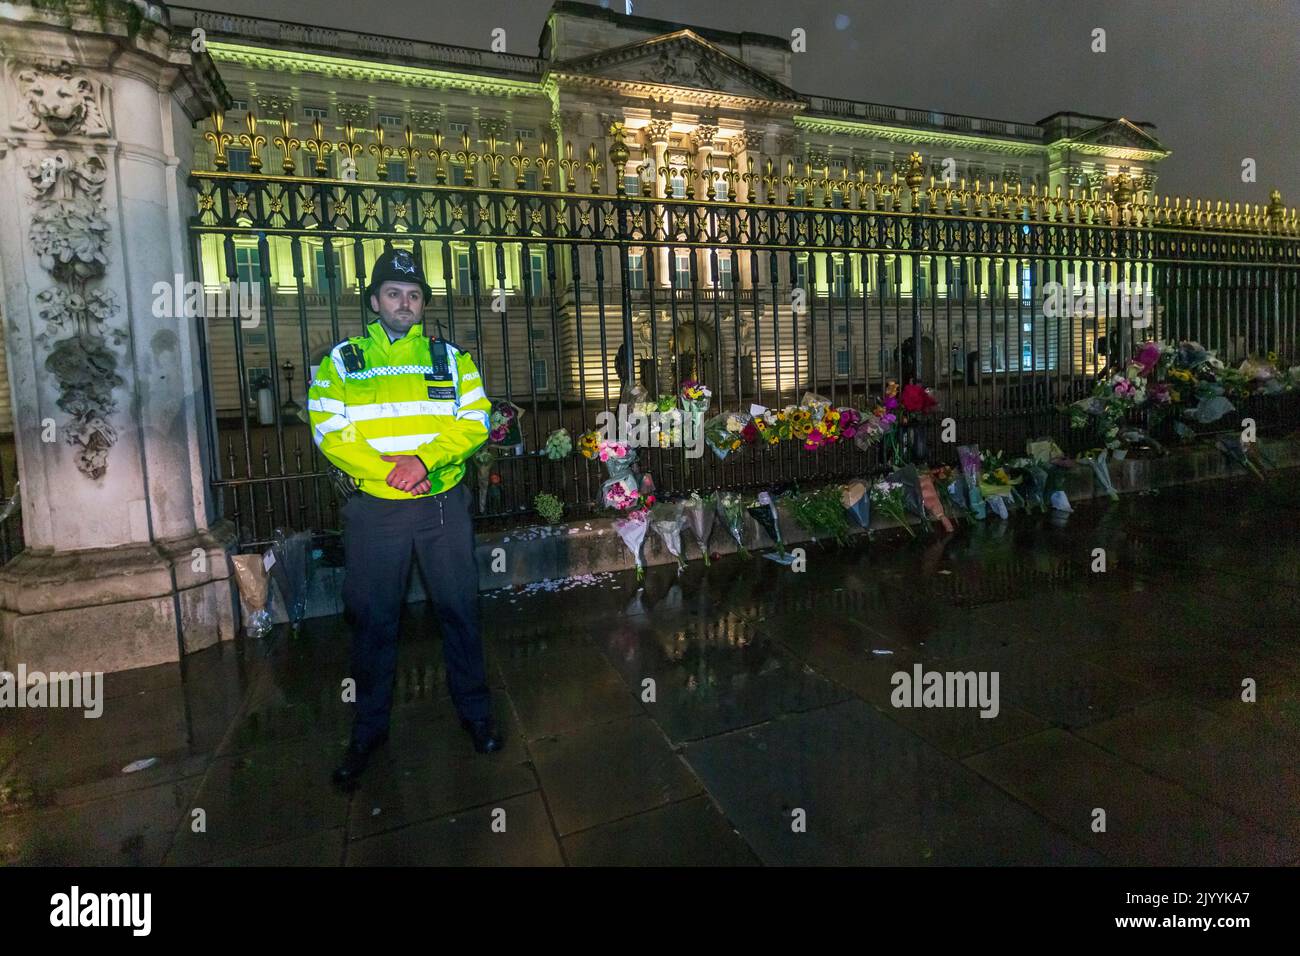 LONDON, ENGLAND - SEPTEMBER 08: Members of the public layed flowers and pay their respects following the death today of Queen Elizabeth ,Credit: Horst A. Friedrichs Alamy Live News Stock Photo